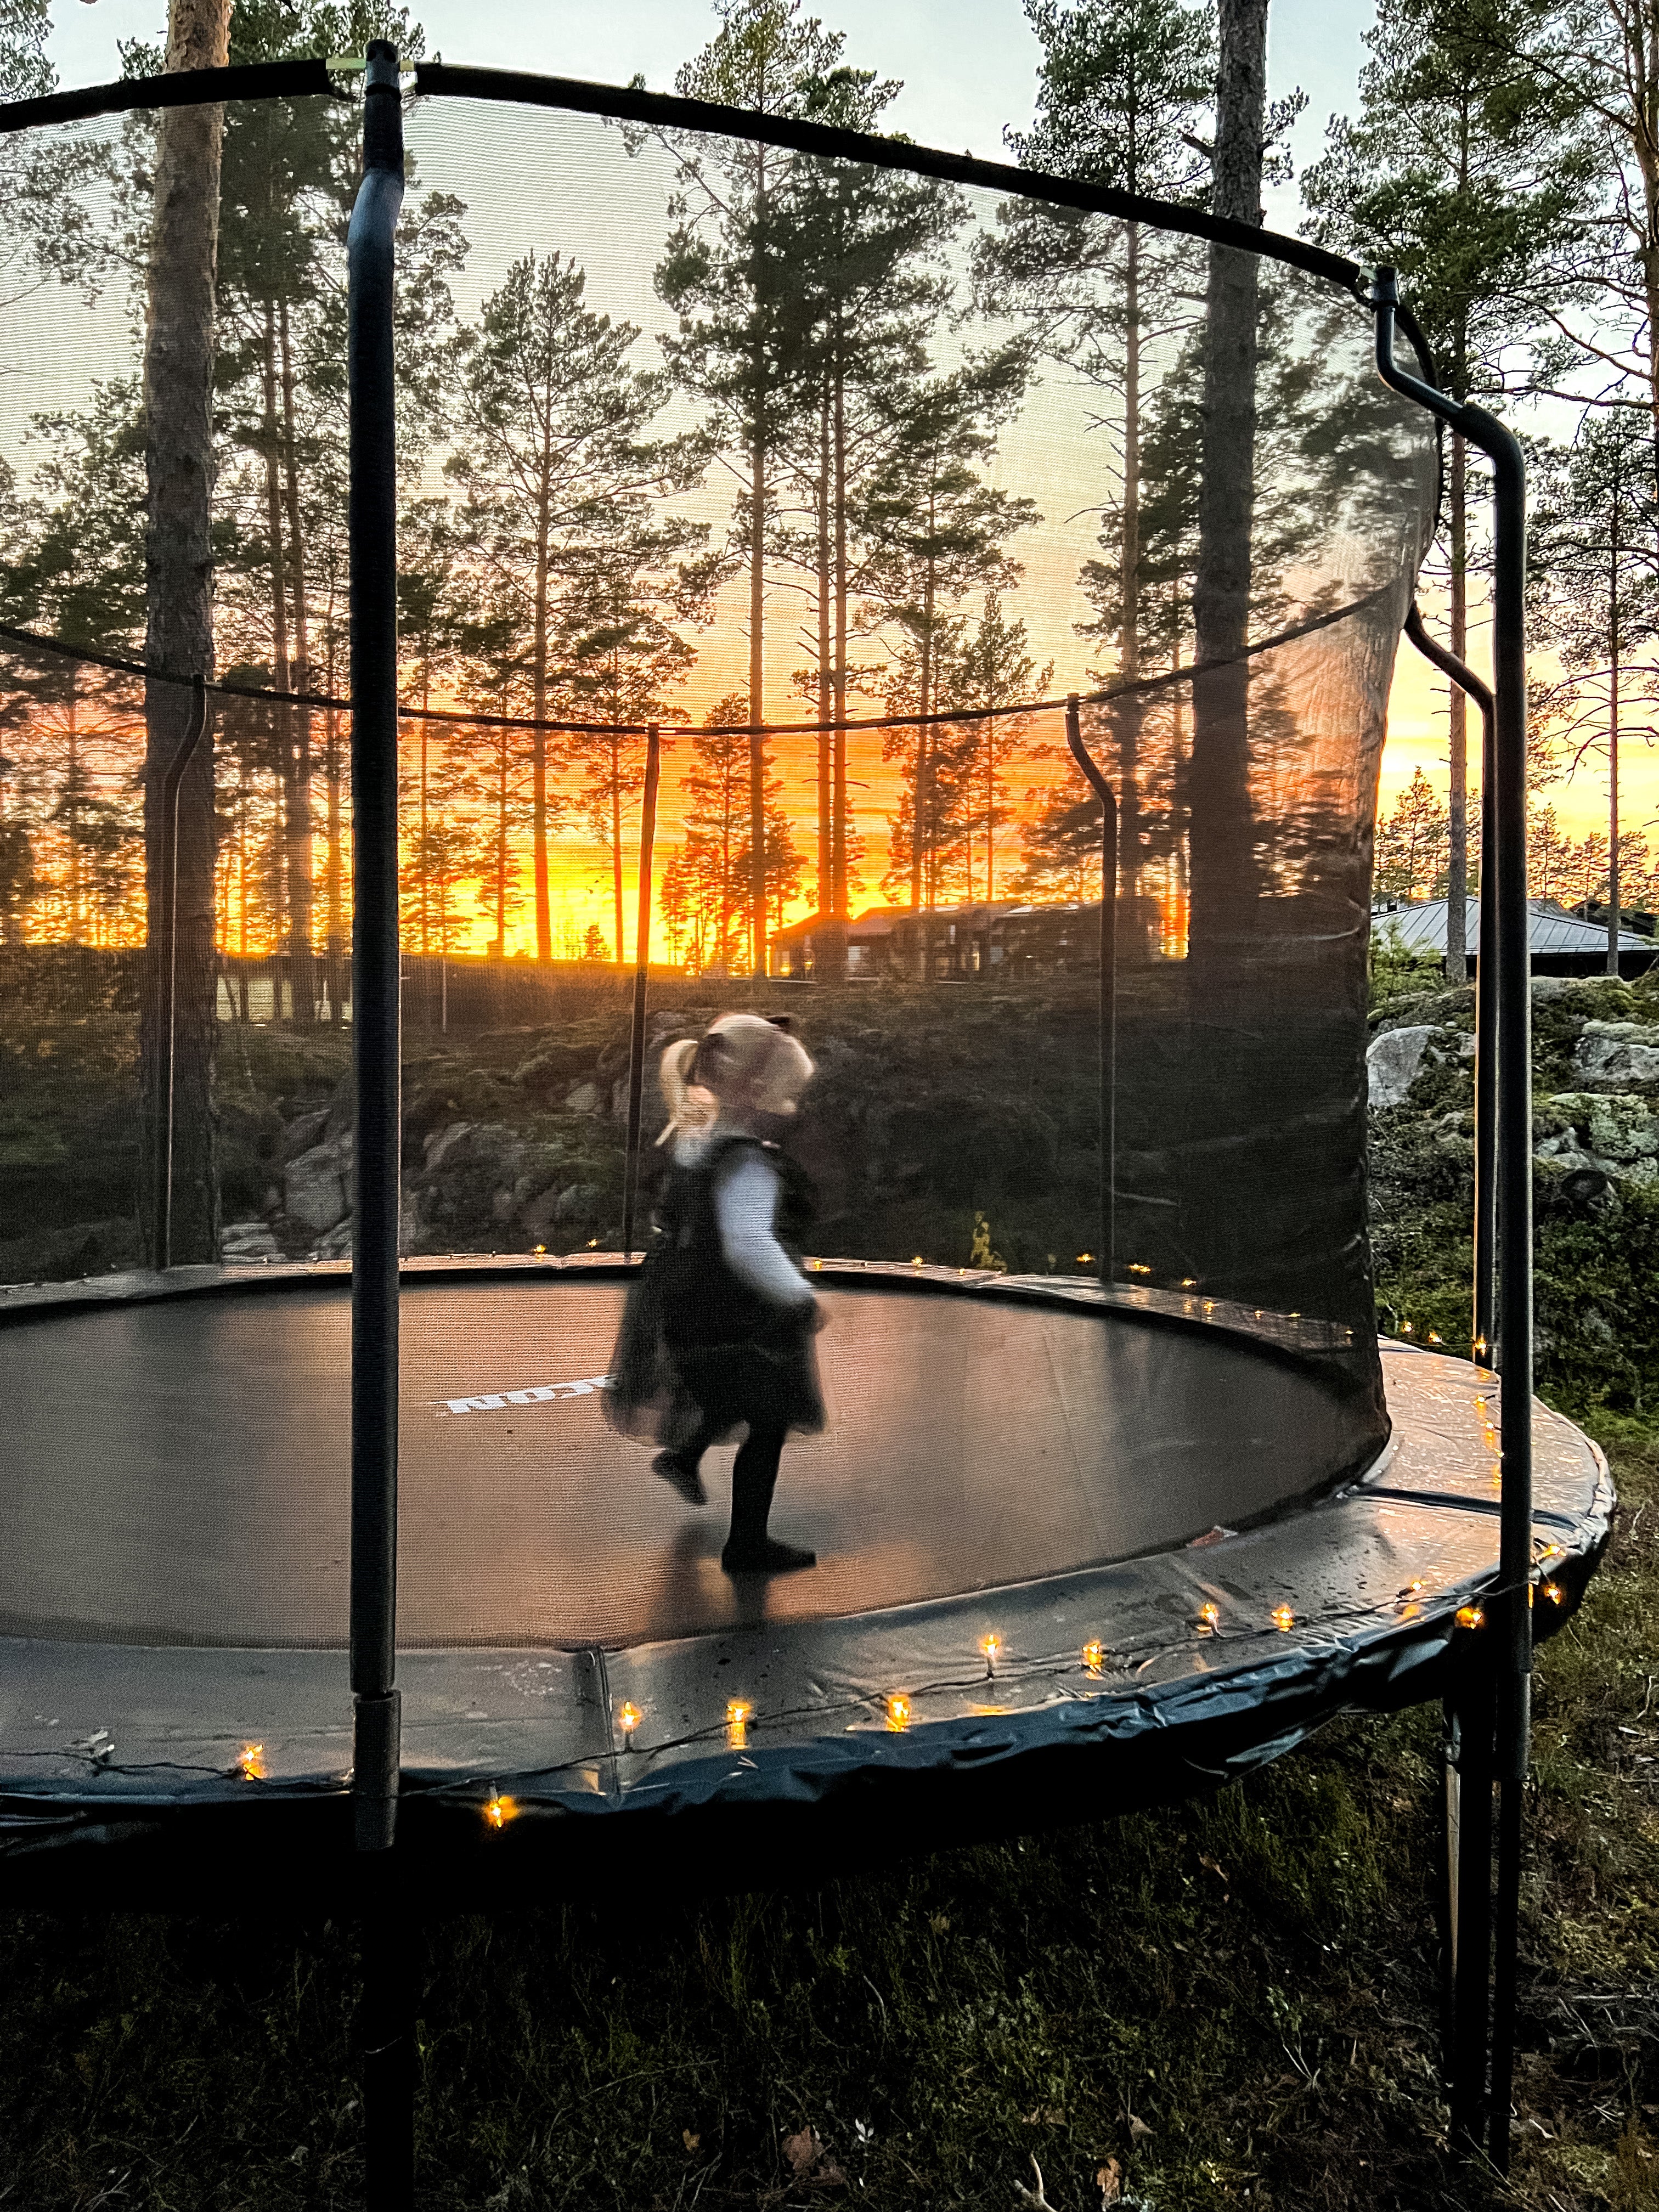 A little girl in Christmas clothing on an ACON round trampoline with enclosure